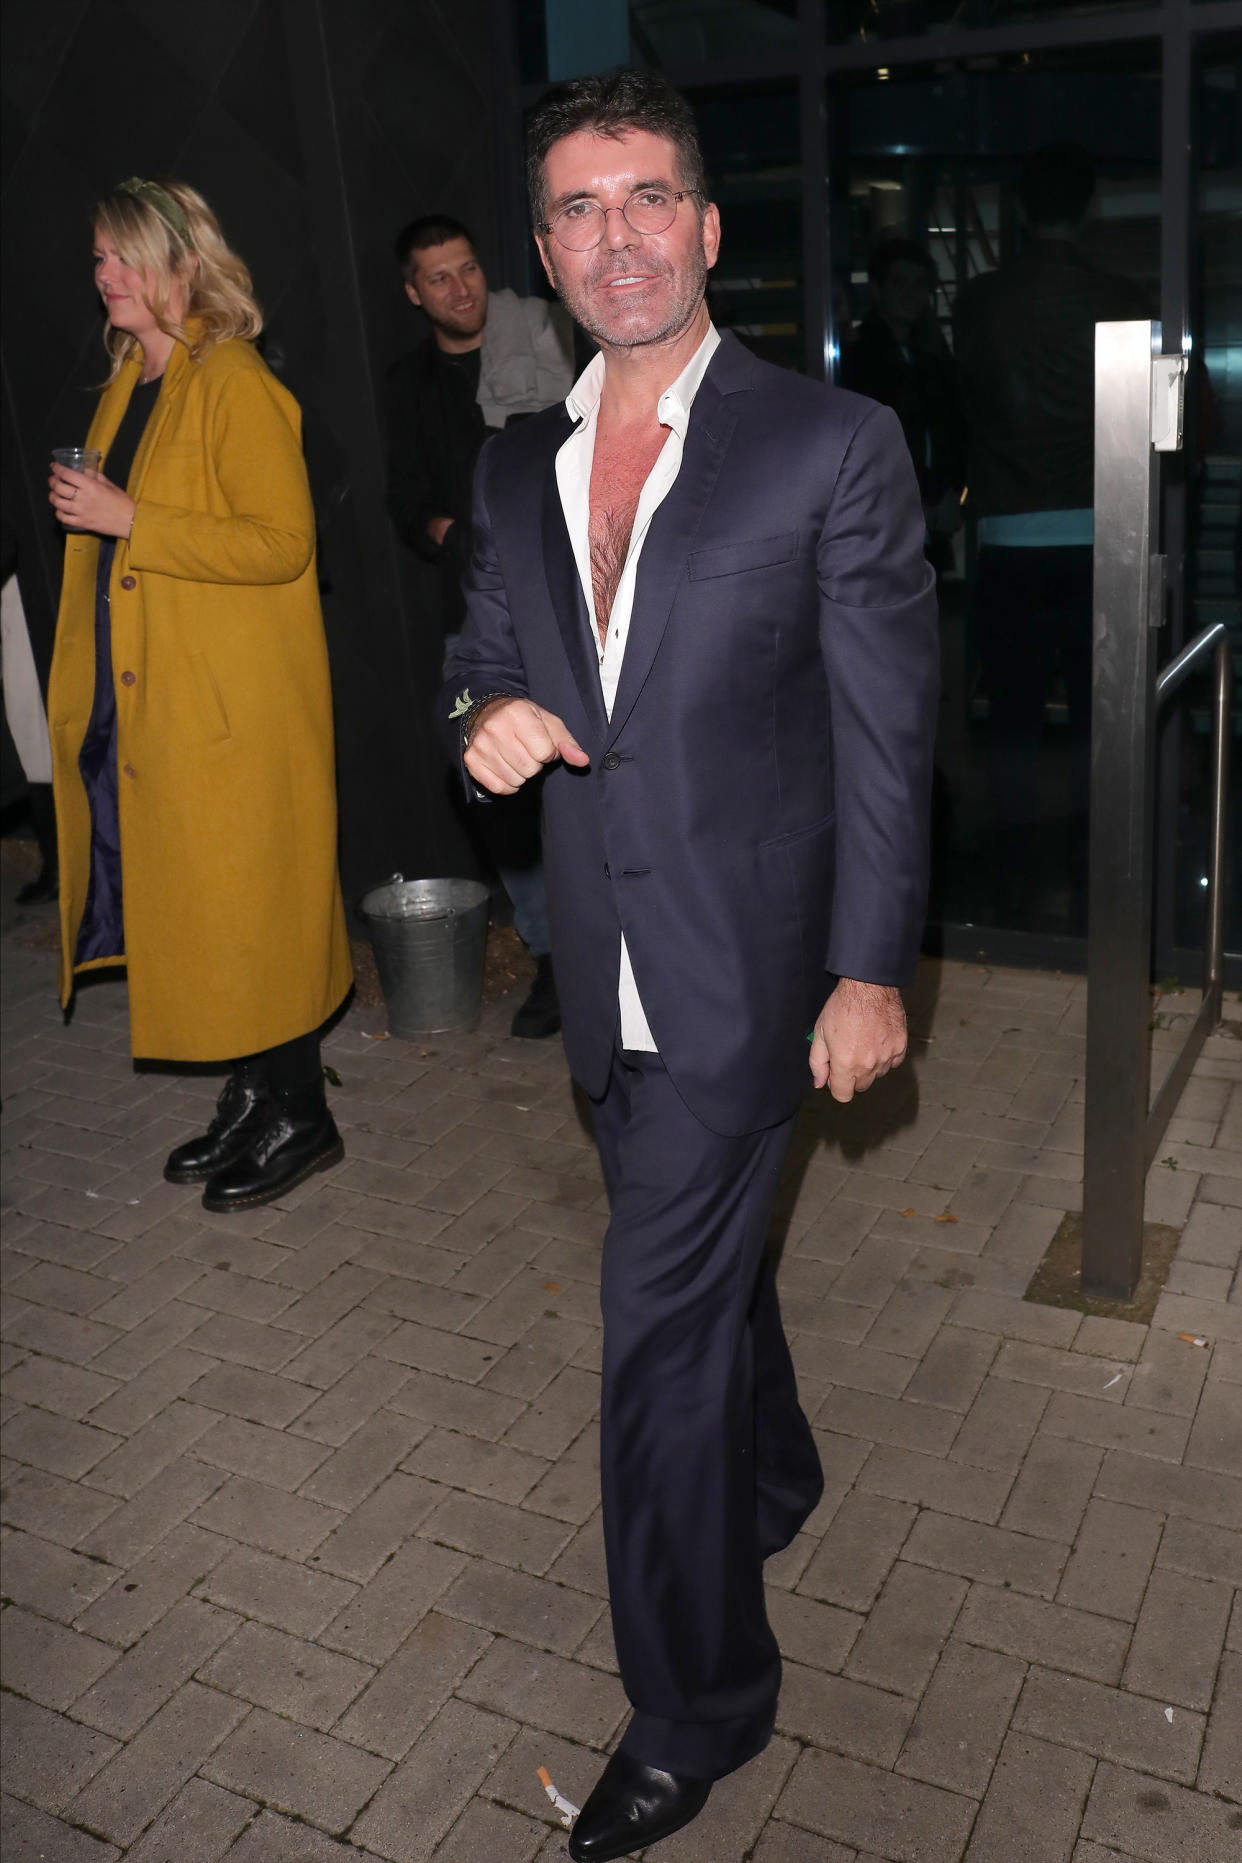 Simon Cowell leaving LH2 studios after Celebrity X Factor on November 16, 2019 in London. [Photo: Getty]